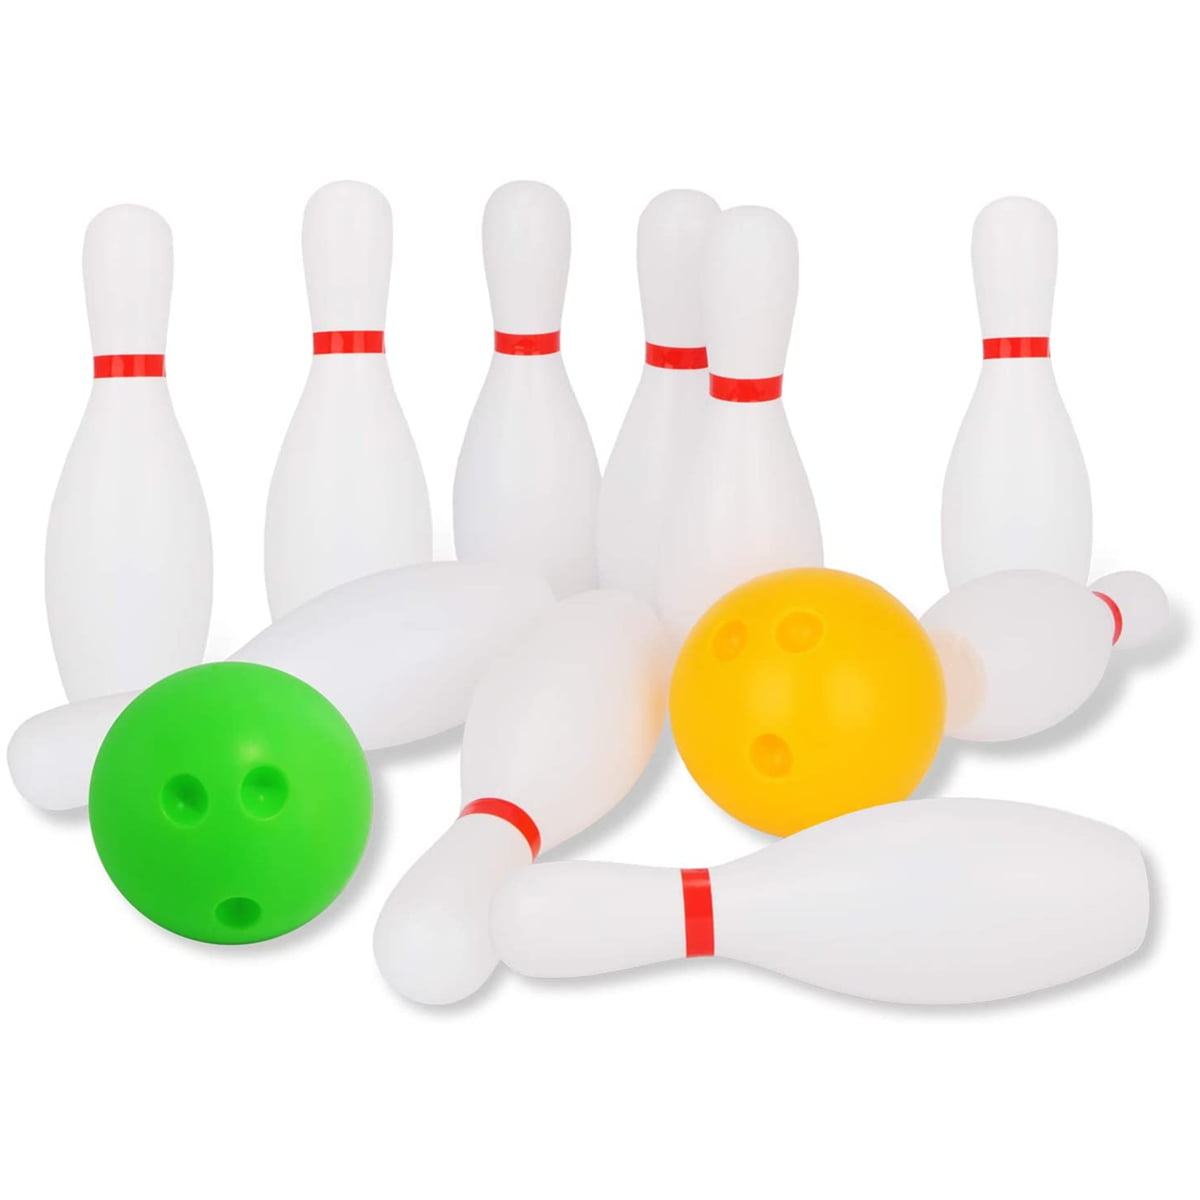 AG_ 12Pcs Solid Color Pins Balls Bowling Game Indoor Sport Development Kids Toy 